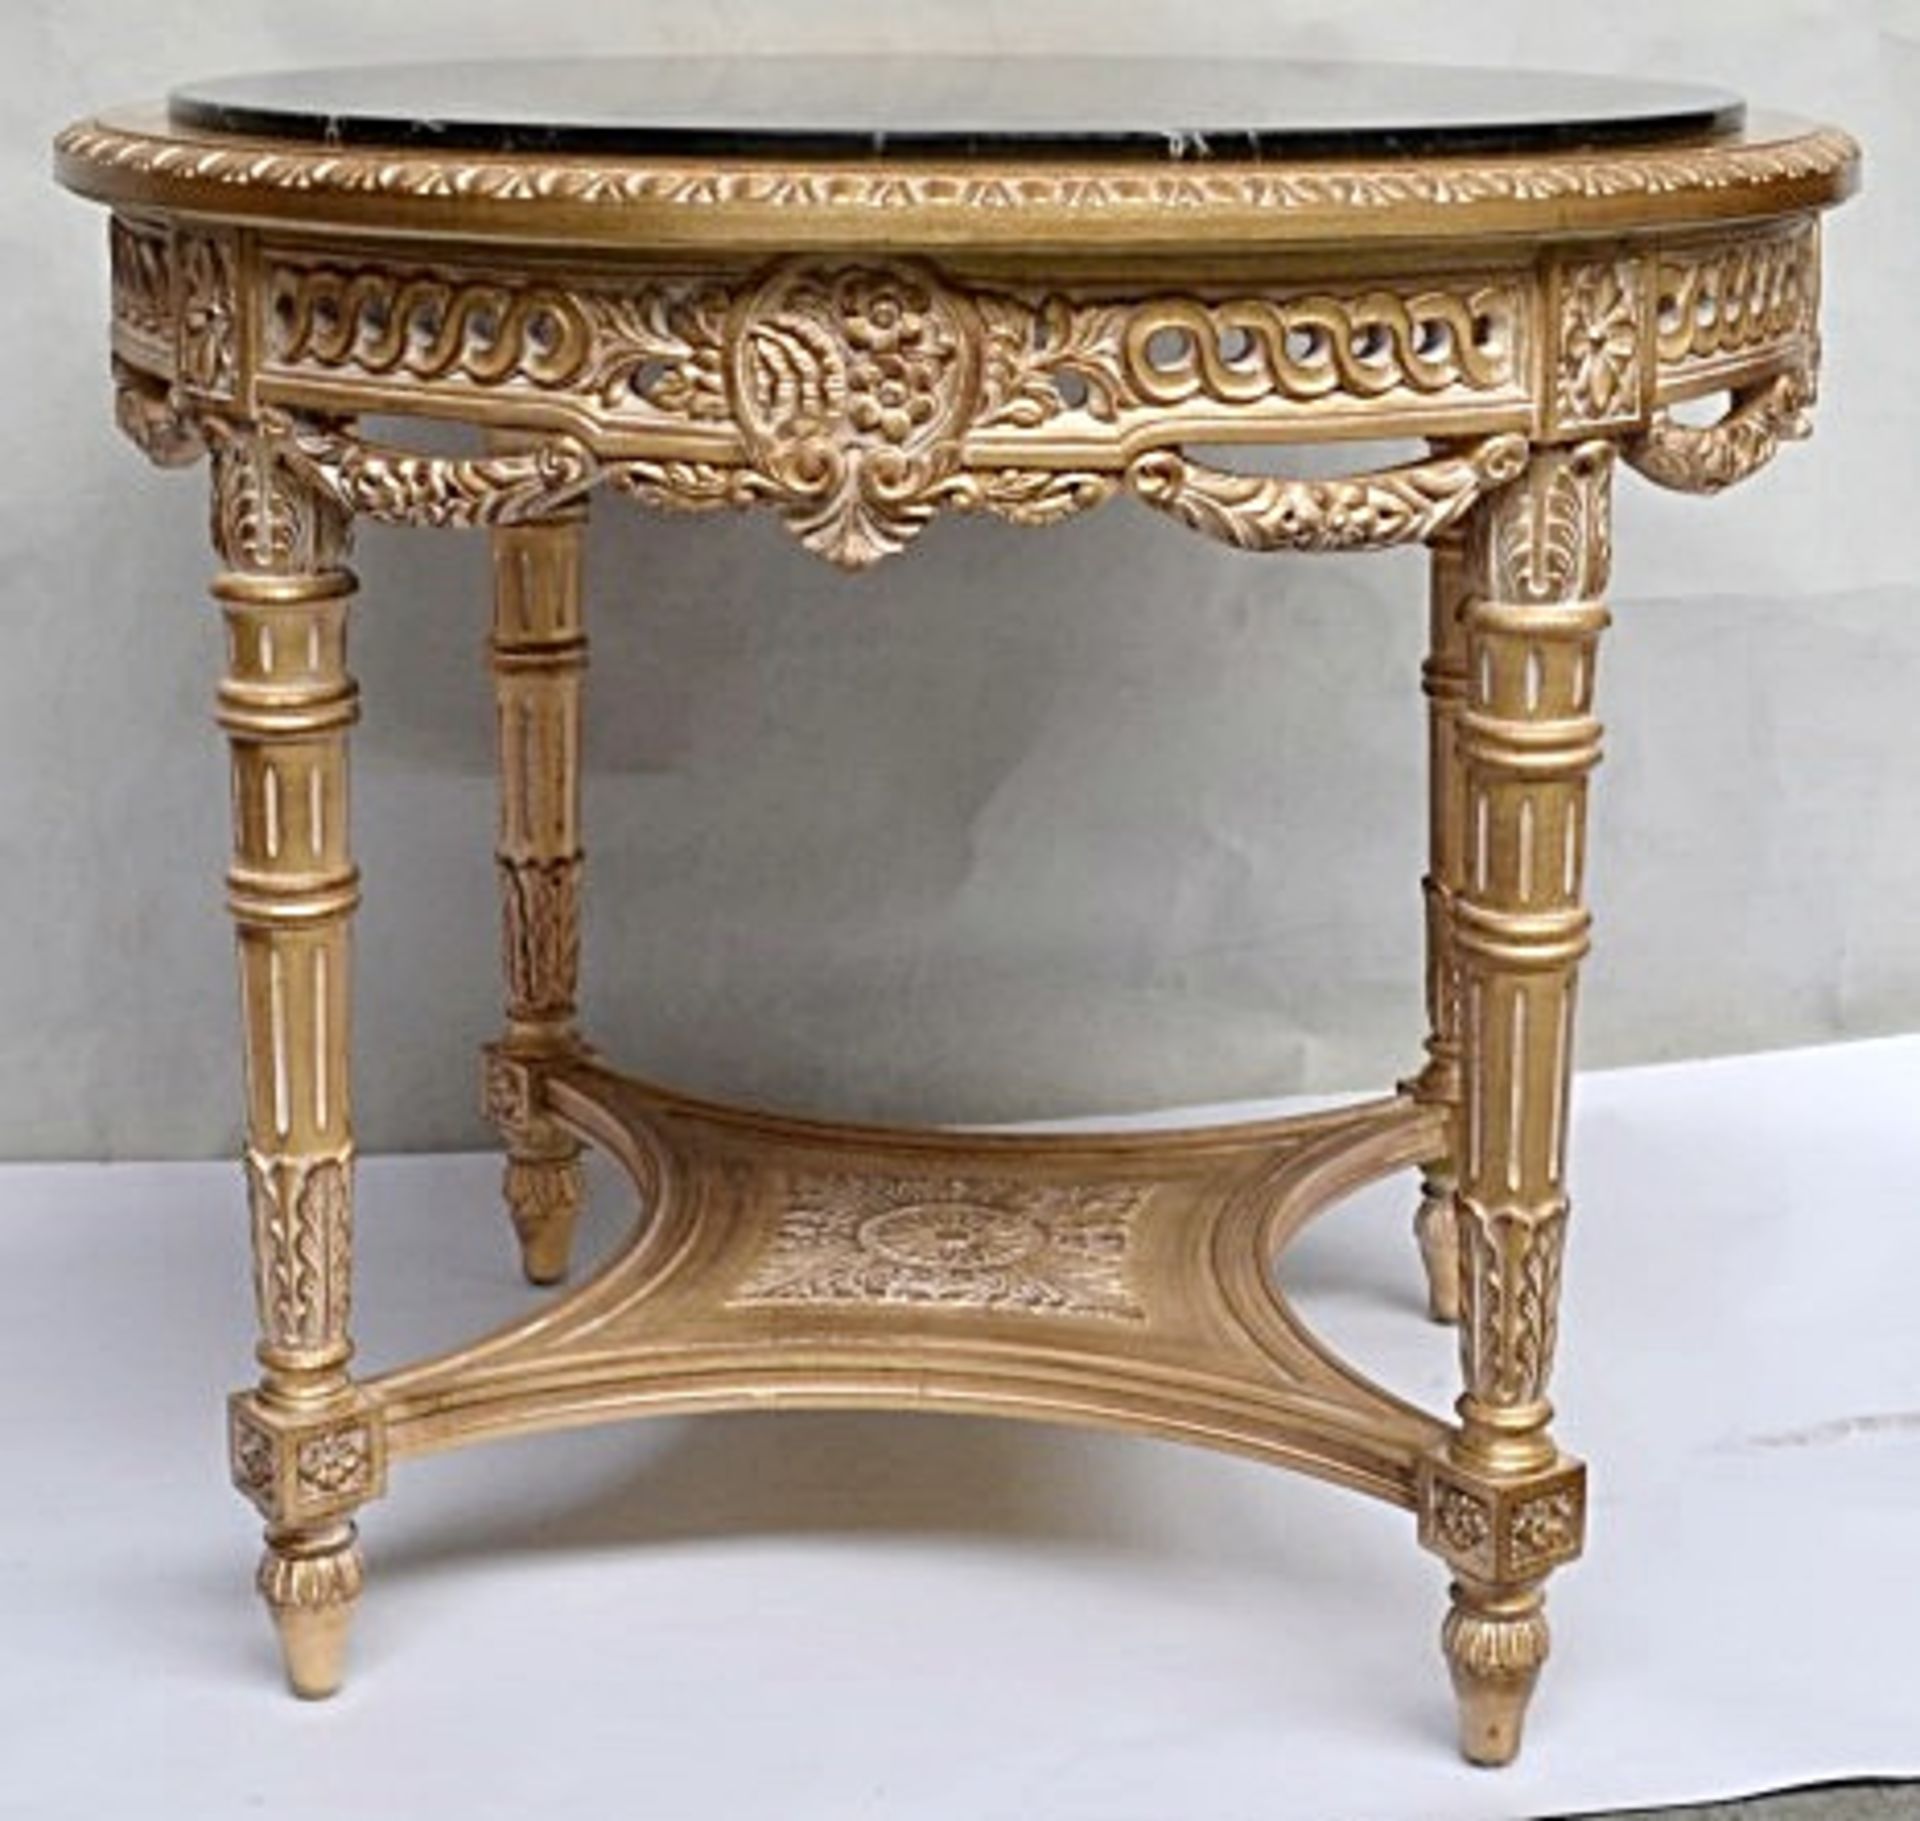 1 x ANGELO CAPPELLINI Marble Topped Wooden Coffee Table In Gold - Dimensions: H76cm x Diameter - Image 2 of 8